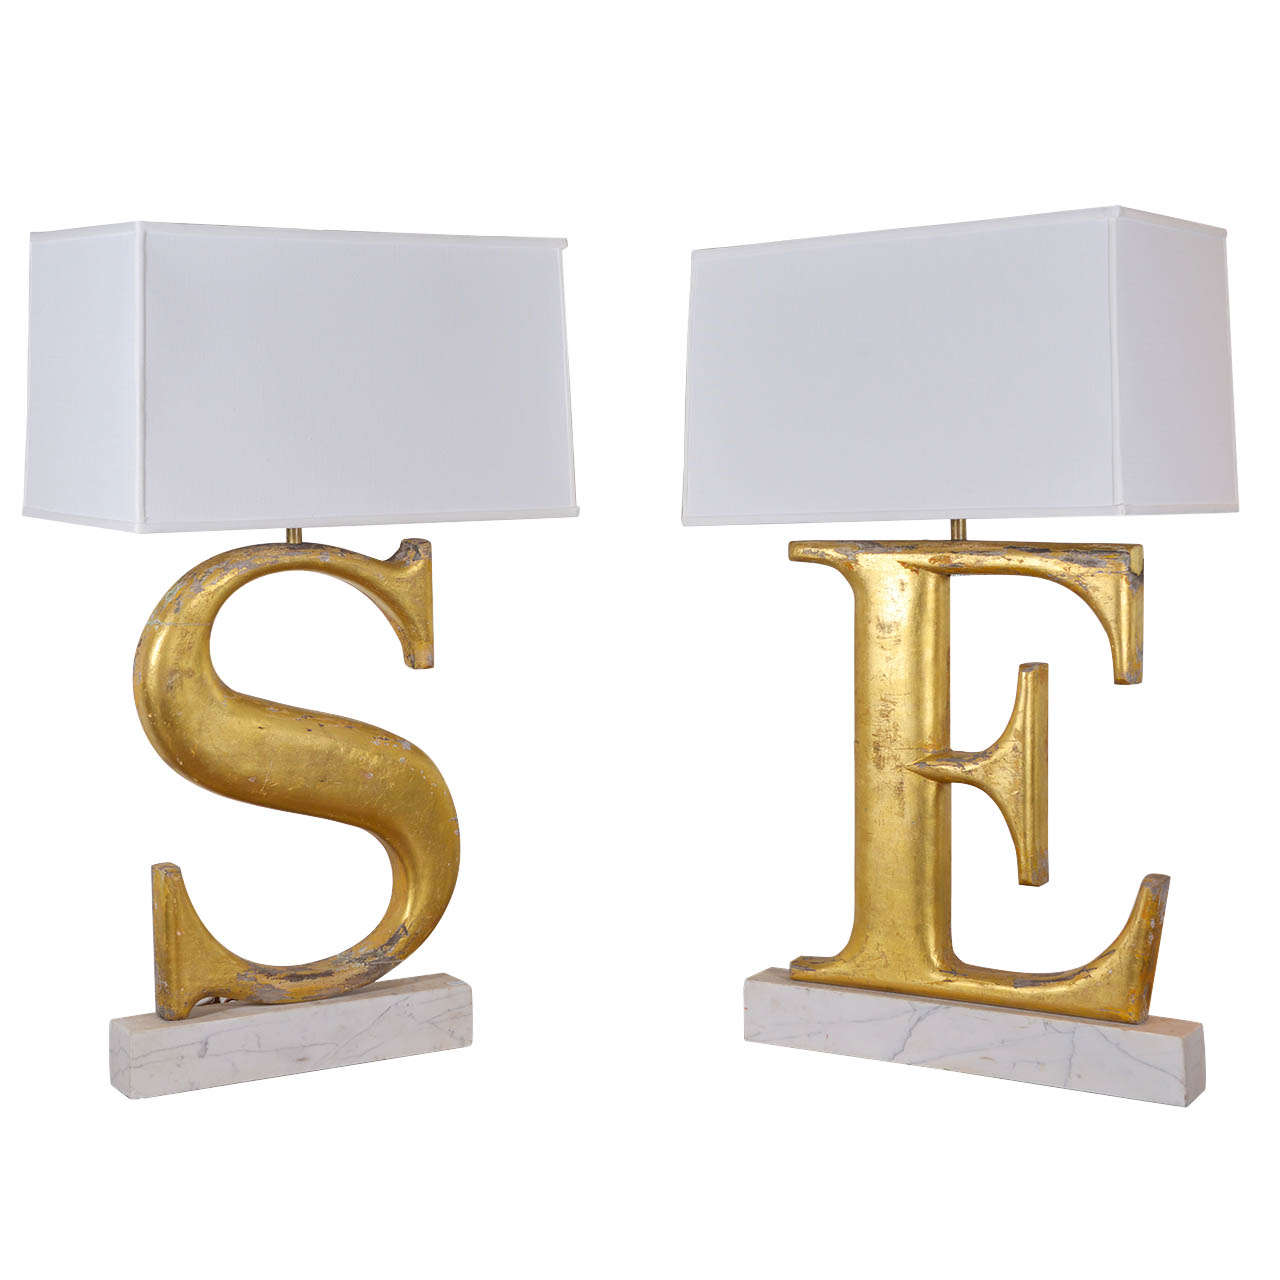 Lamps Made from 19th Century Shop Letters